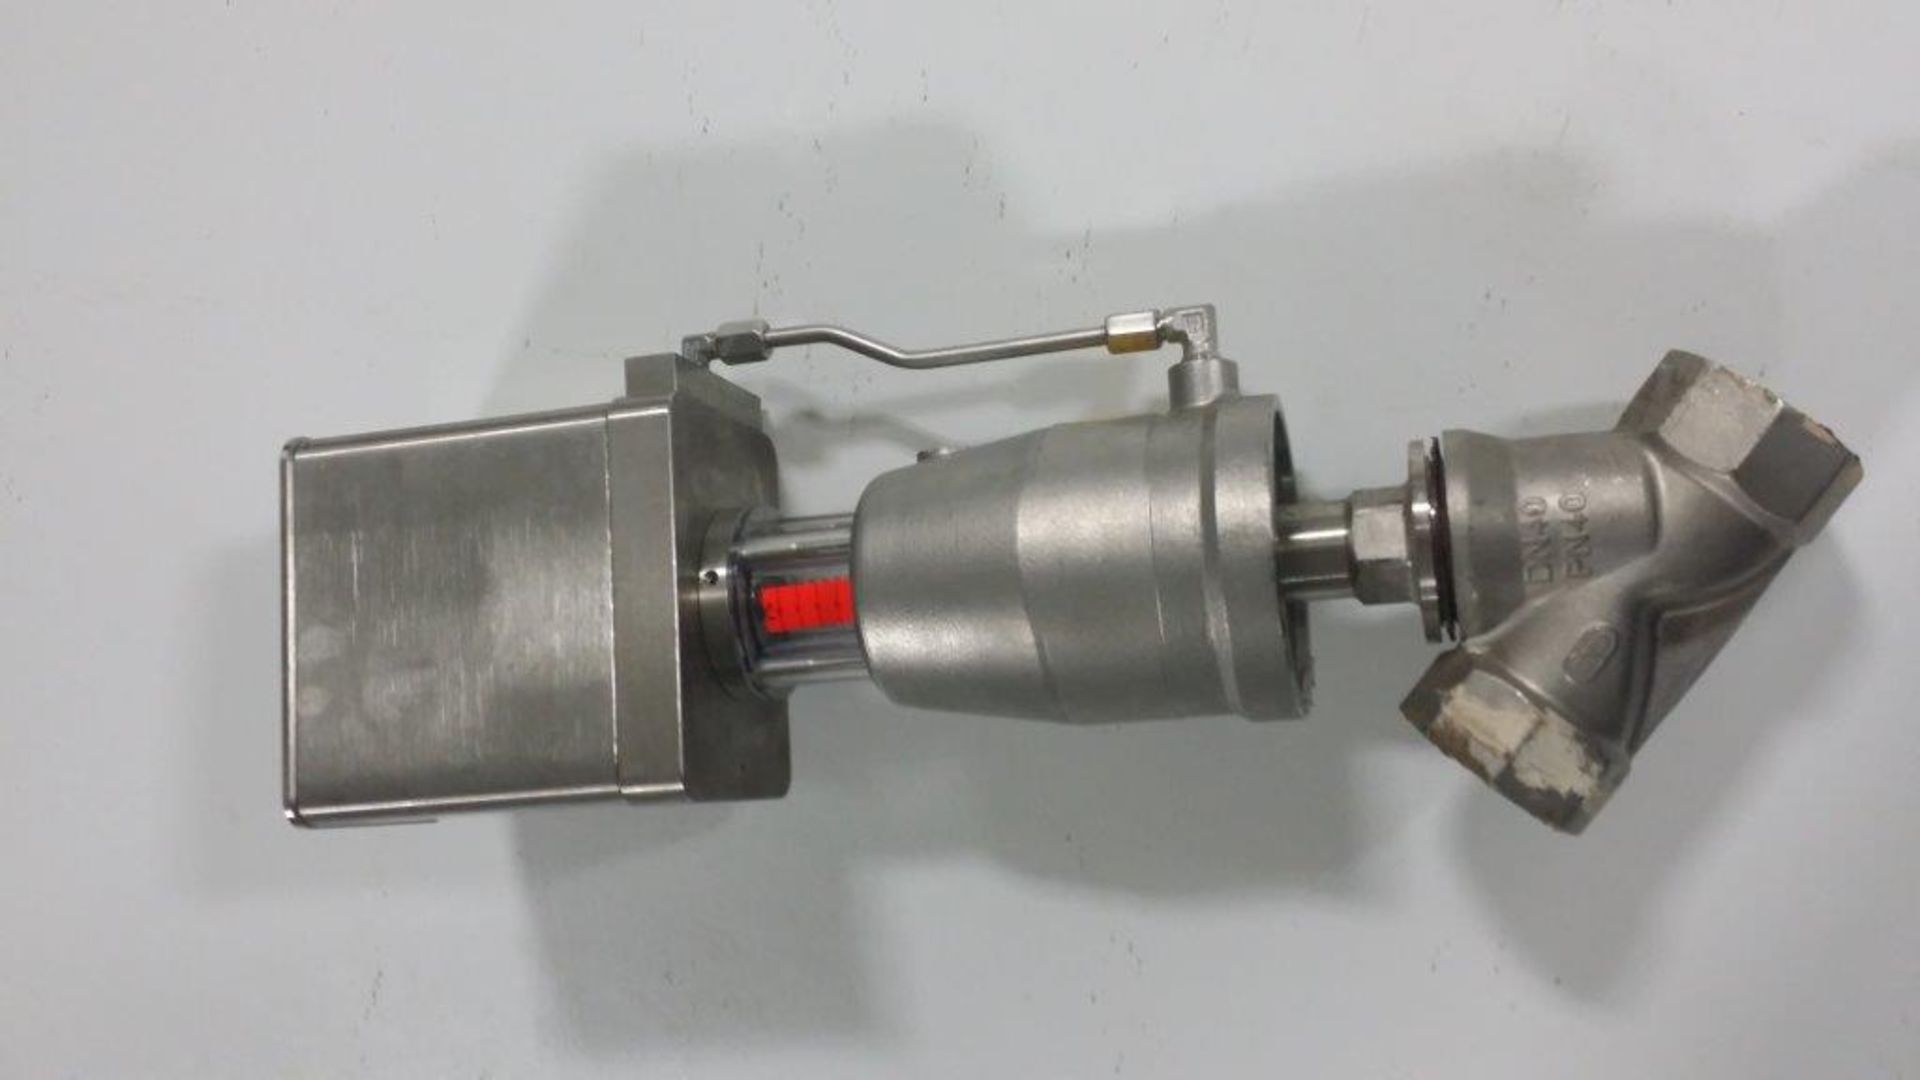 Schubert & Salzer Type 7020 Angle Seat Control Valve Size 1/4" to 3" Pressures up to 580 PSI, - Image 3 of 5